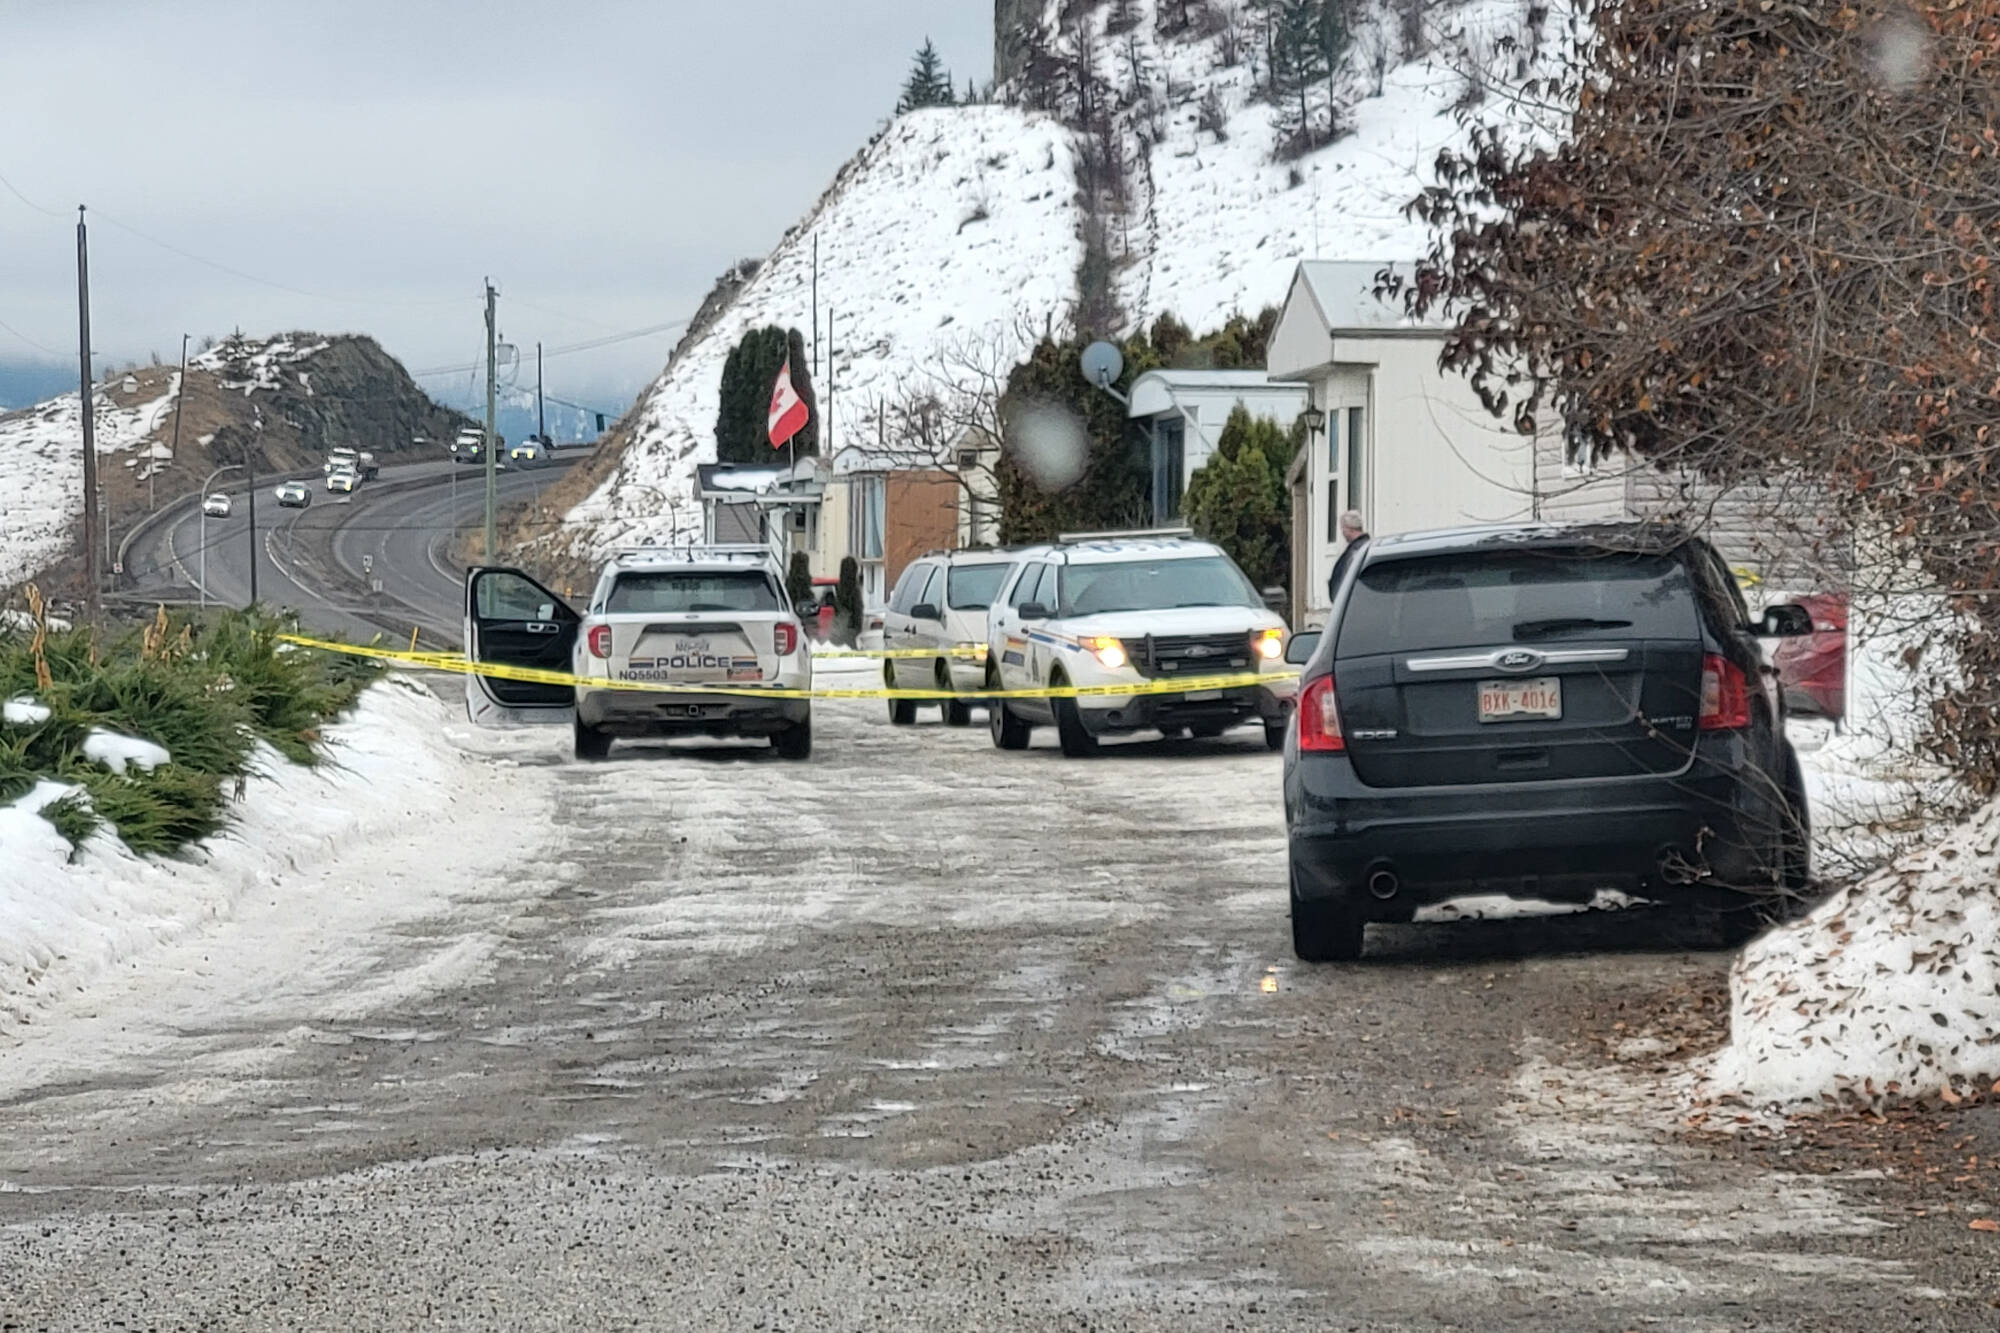 A large police presence could be seen on Clerke Road in Coldstream early Tuesday, Jan. 17. Two bodies were discovered inside a home at a trailer park. (Roger Knox - Morning Star)